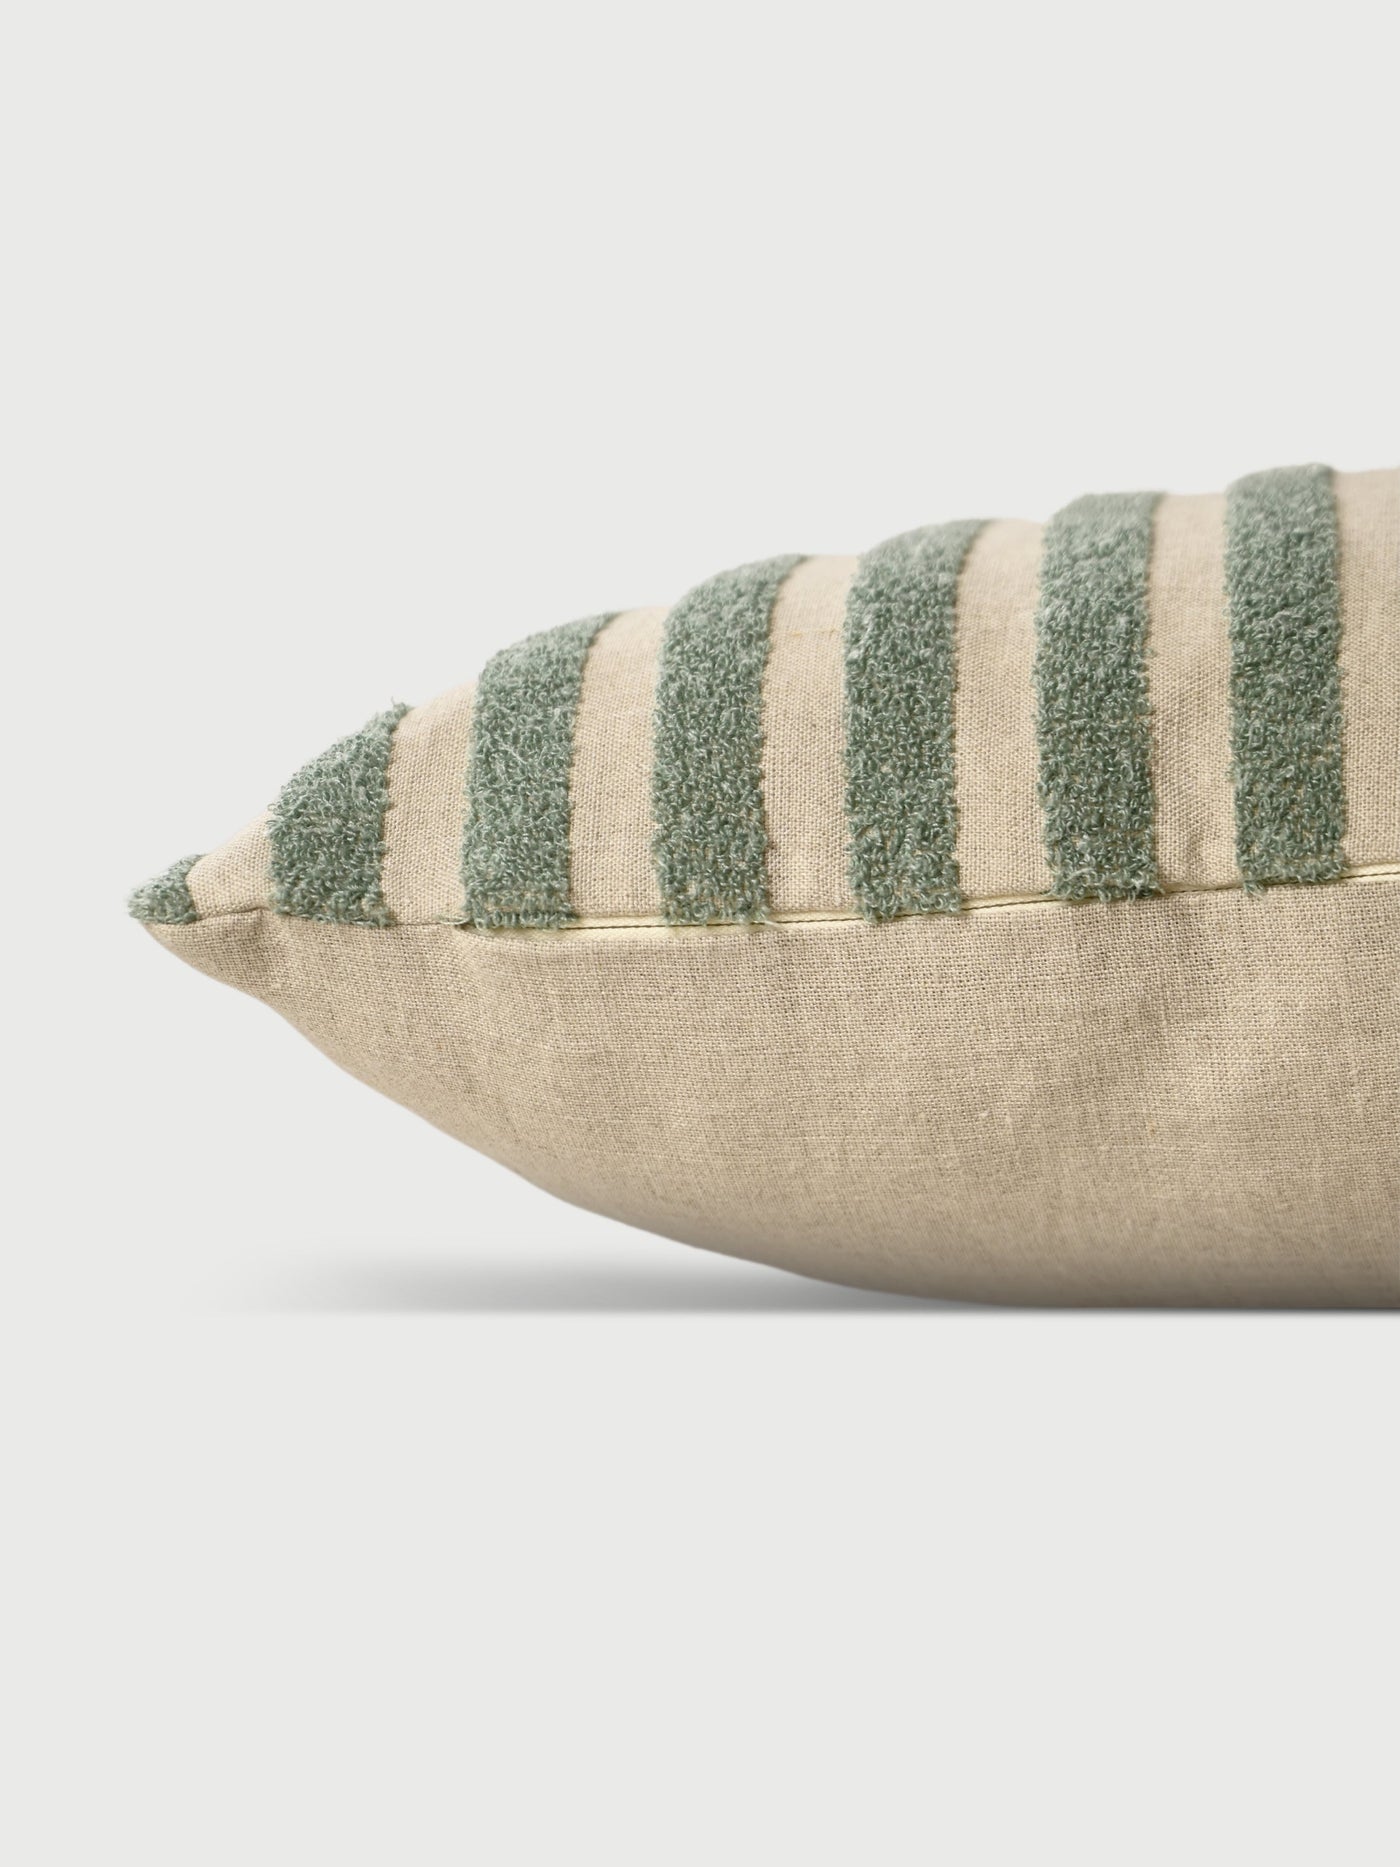 Stripe Embroidered Linen Cushion Cover